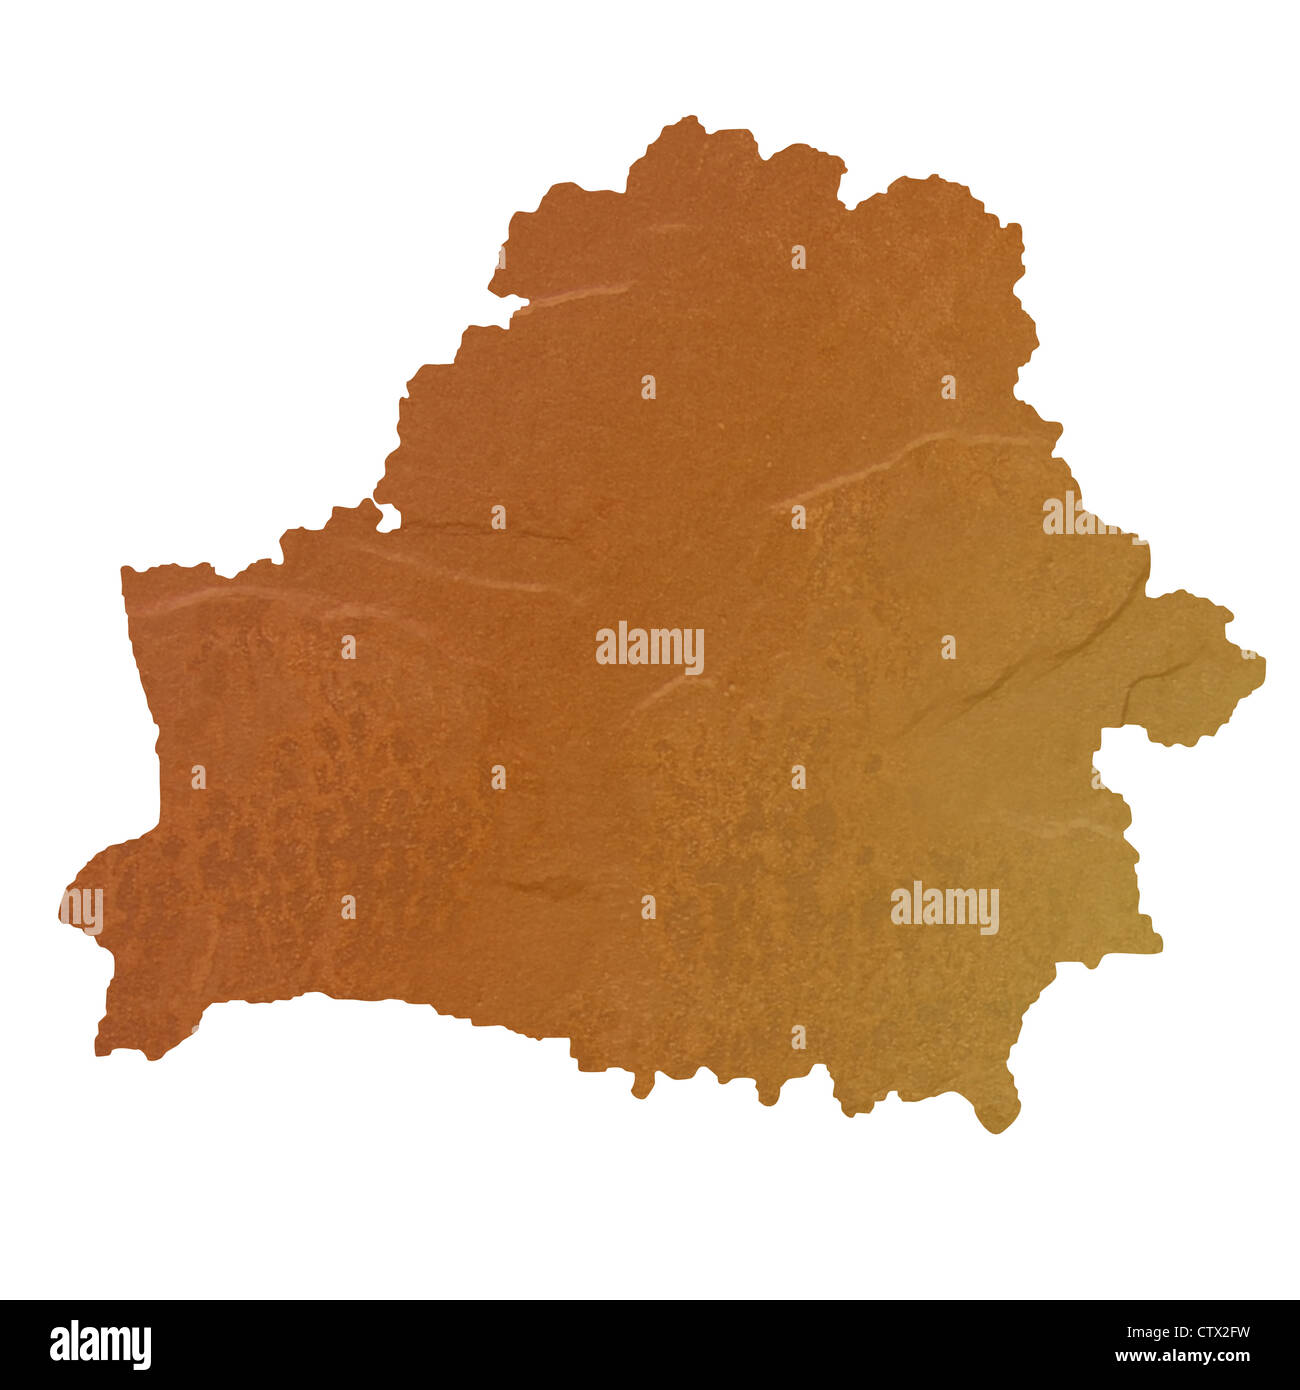 Textured map of Belarus map with brown rock or stone texture, isolated on white background with clipping path. Stock Photo